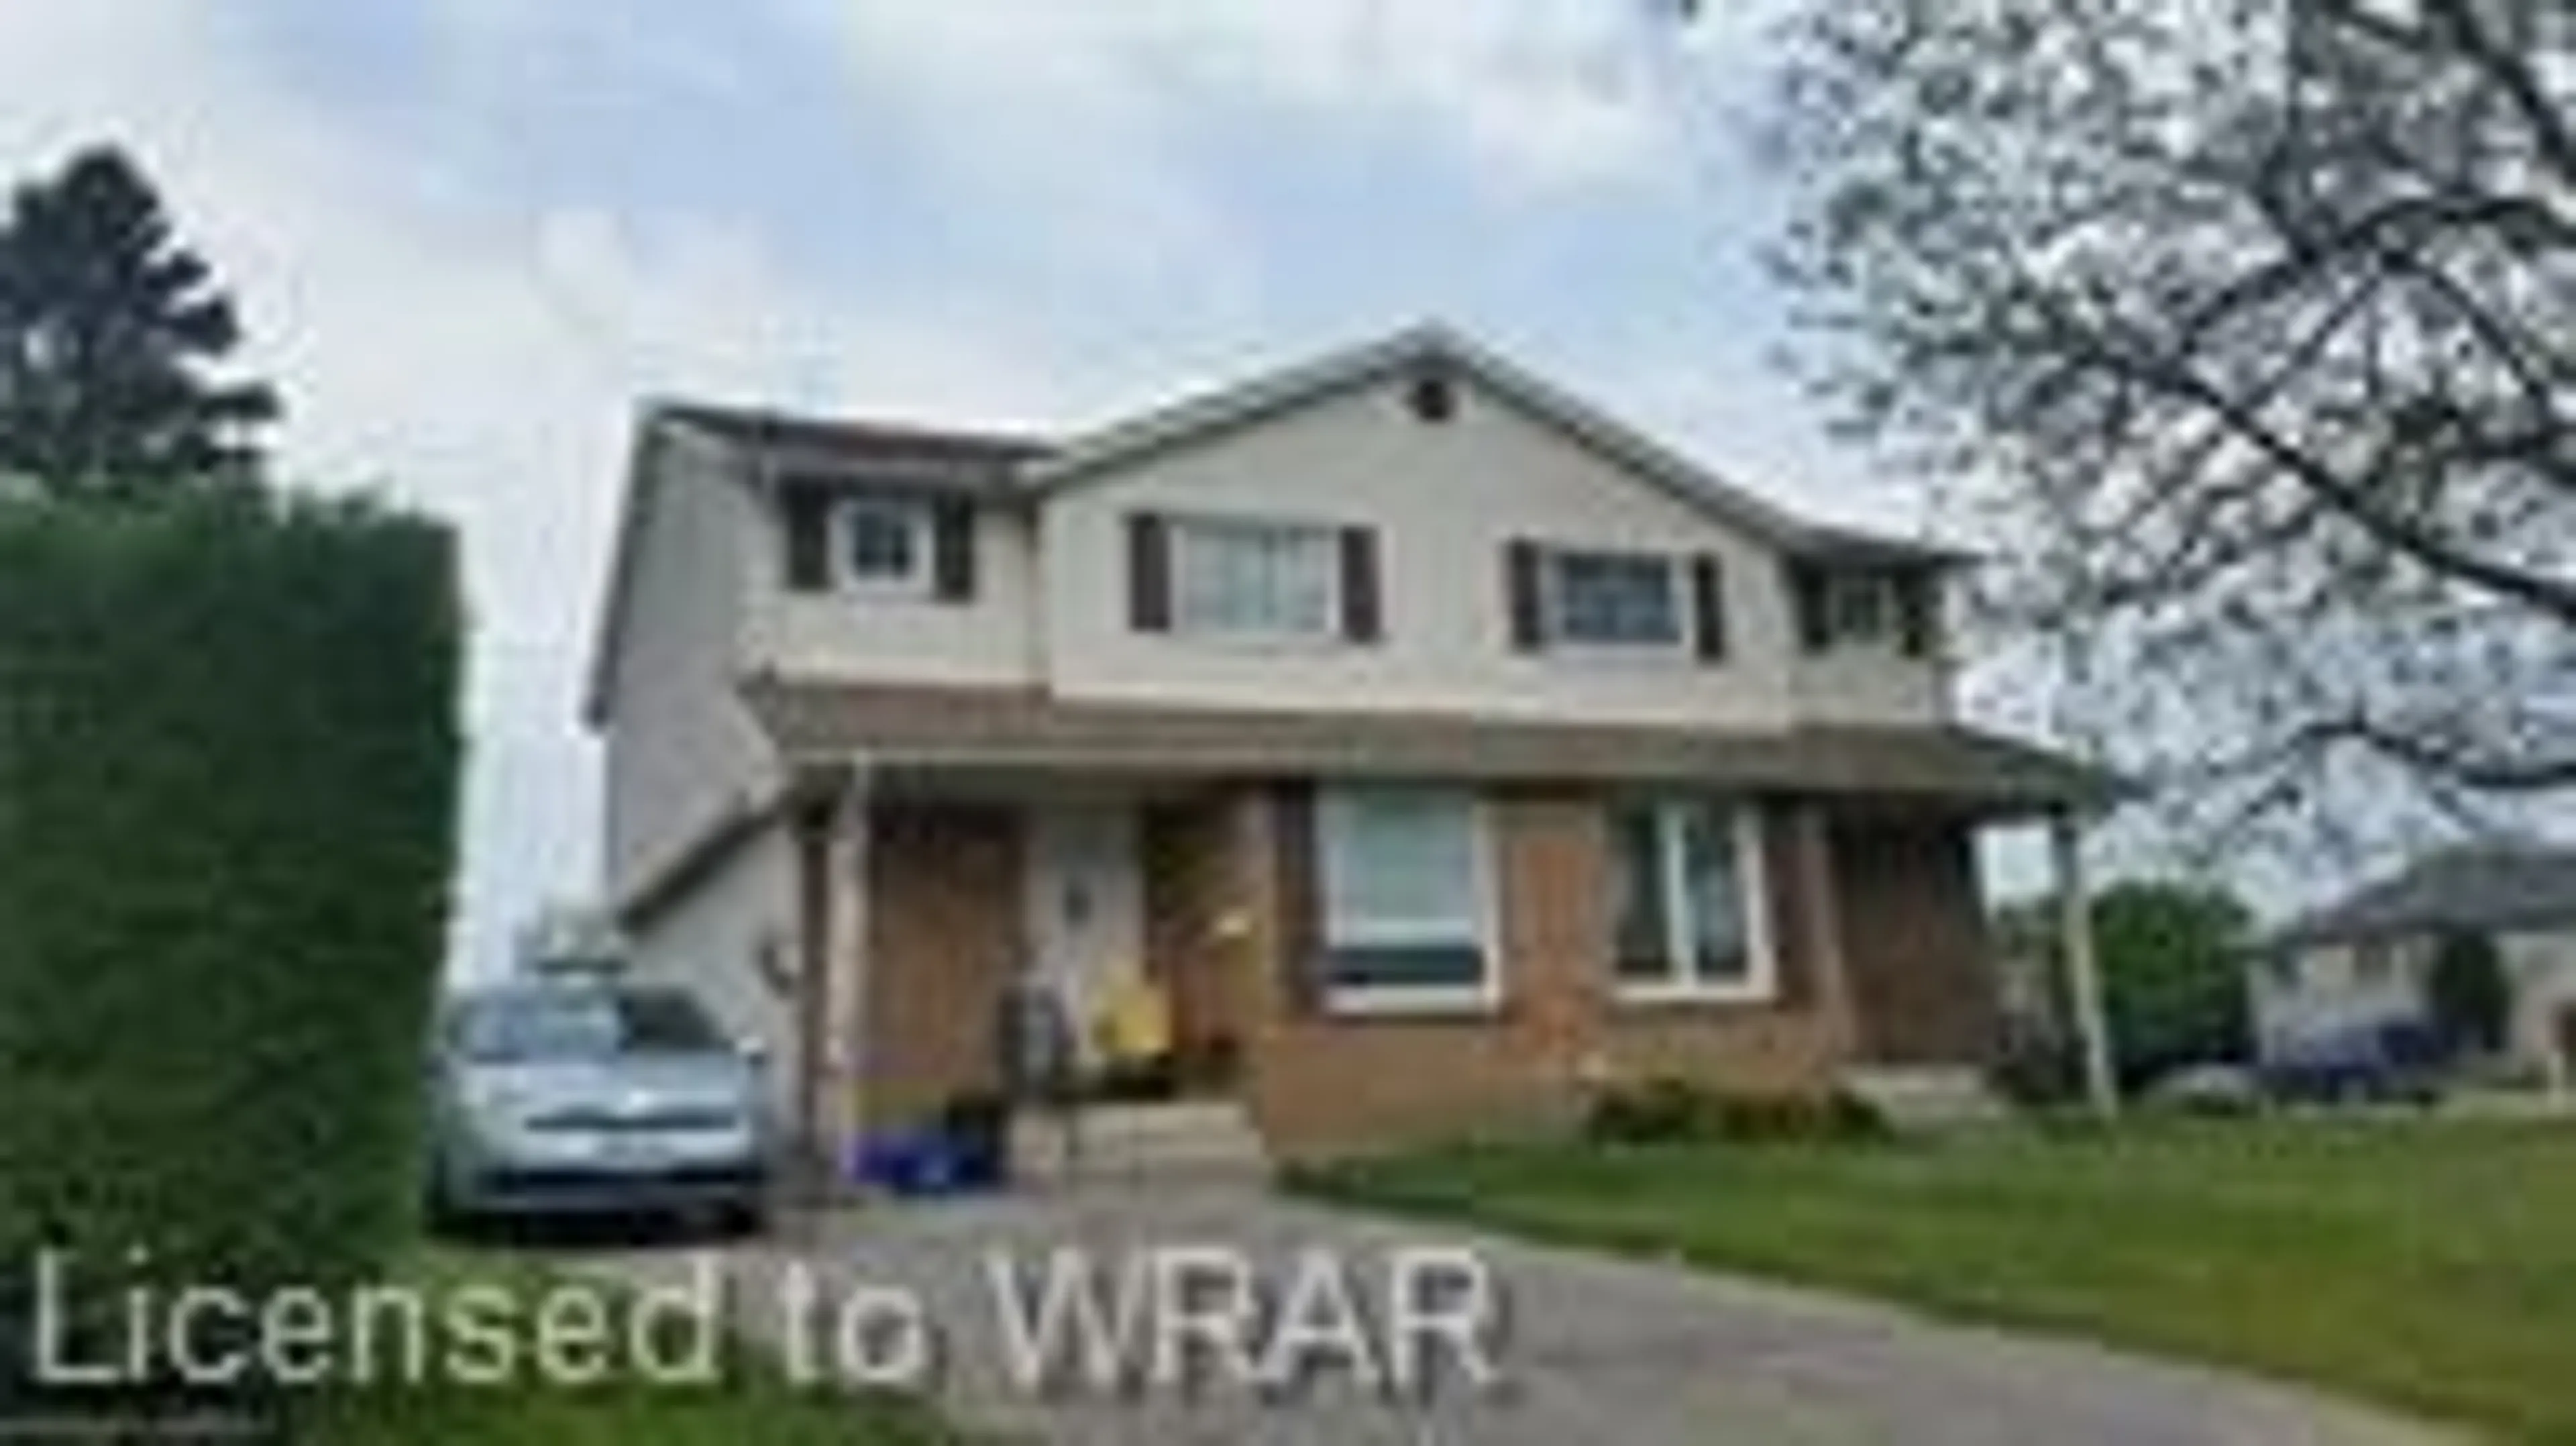 Home with unknown exterior material for 30 Jansen Ave, Kitchener Ontario N2A 2L3